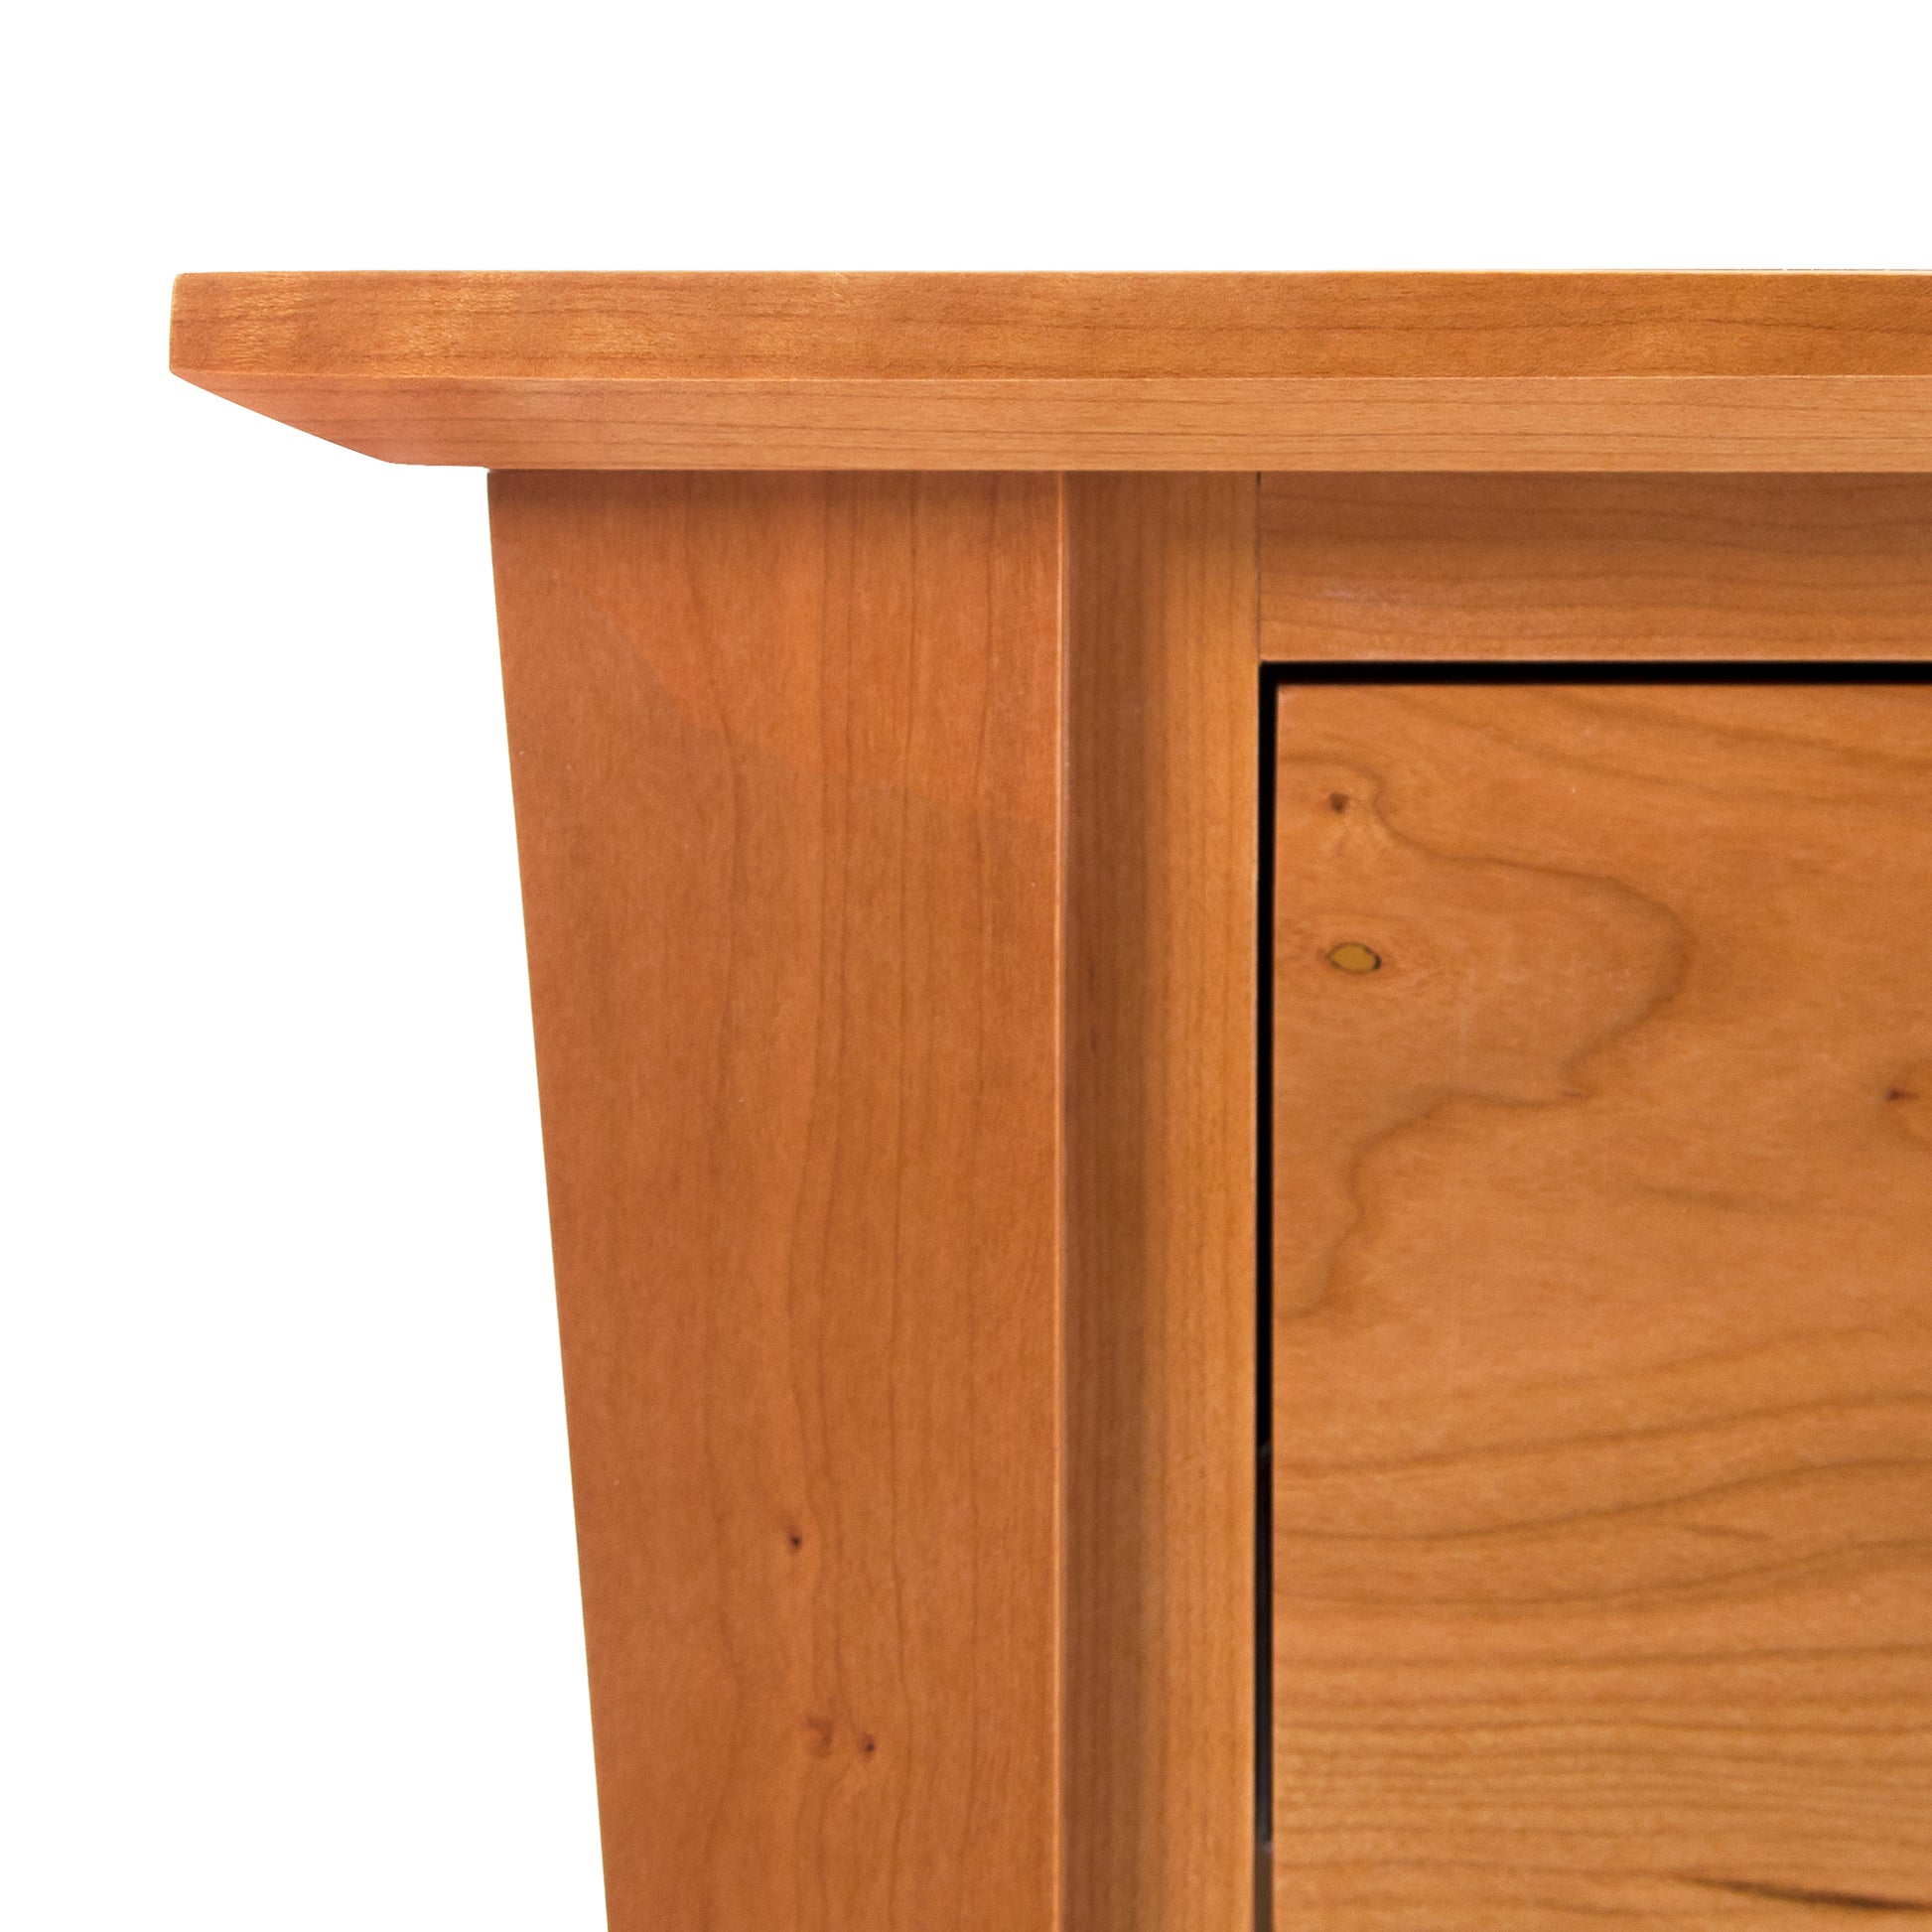 A close up image of a Lyndon Furniture Andrews 3-Drawer Nightstand with storage capabilities.